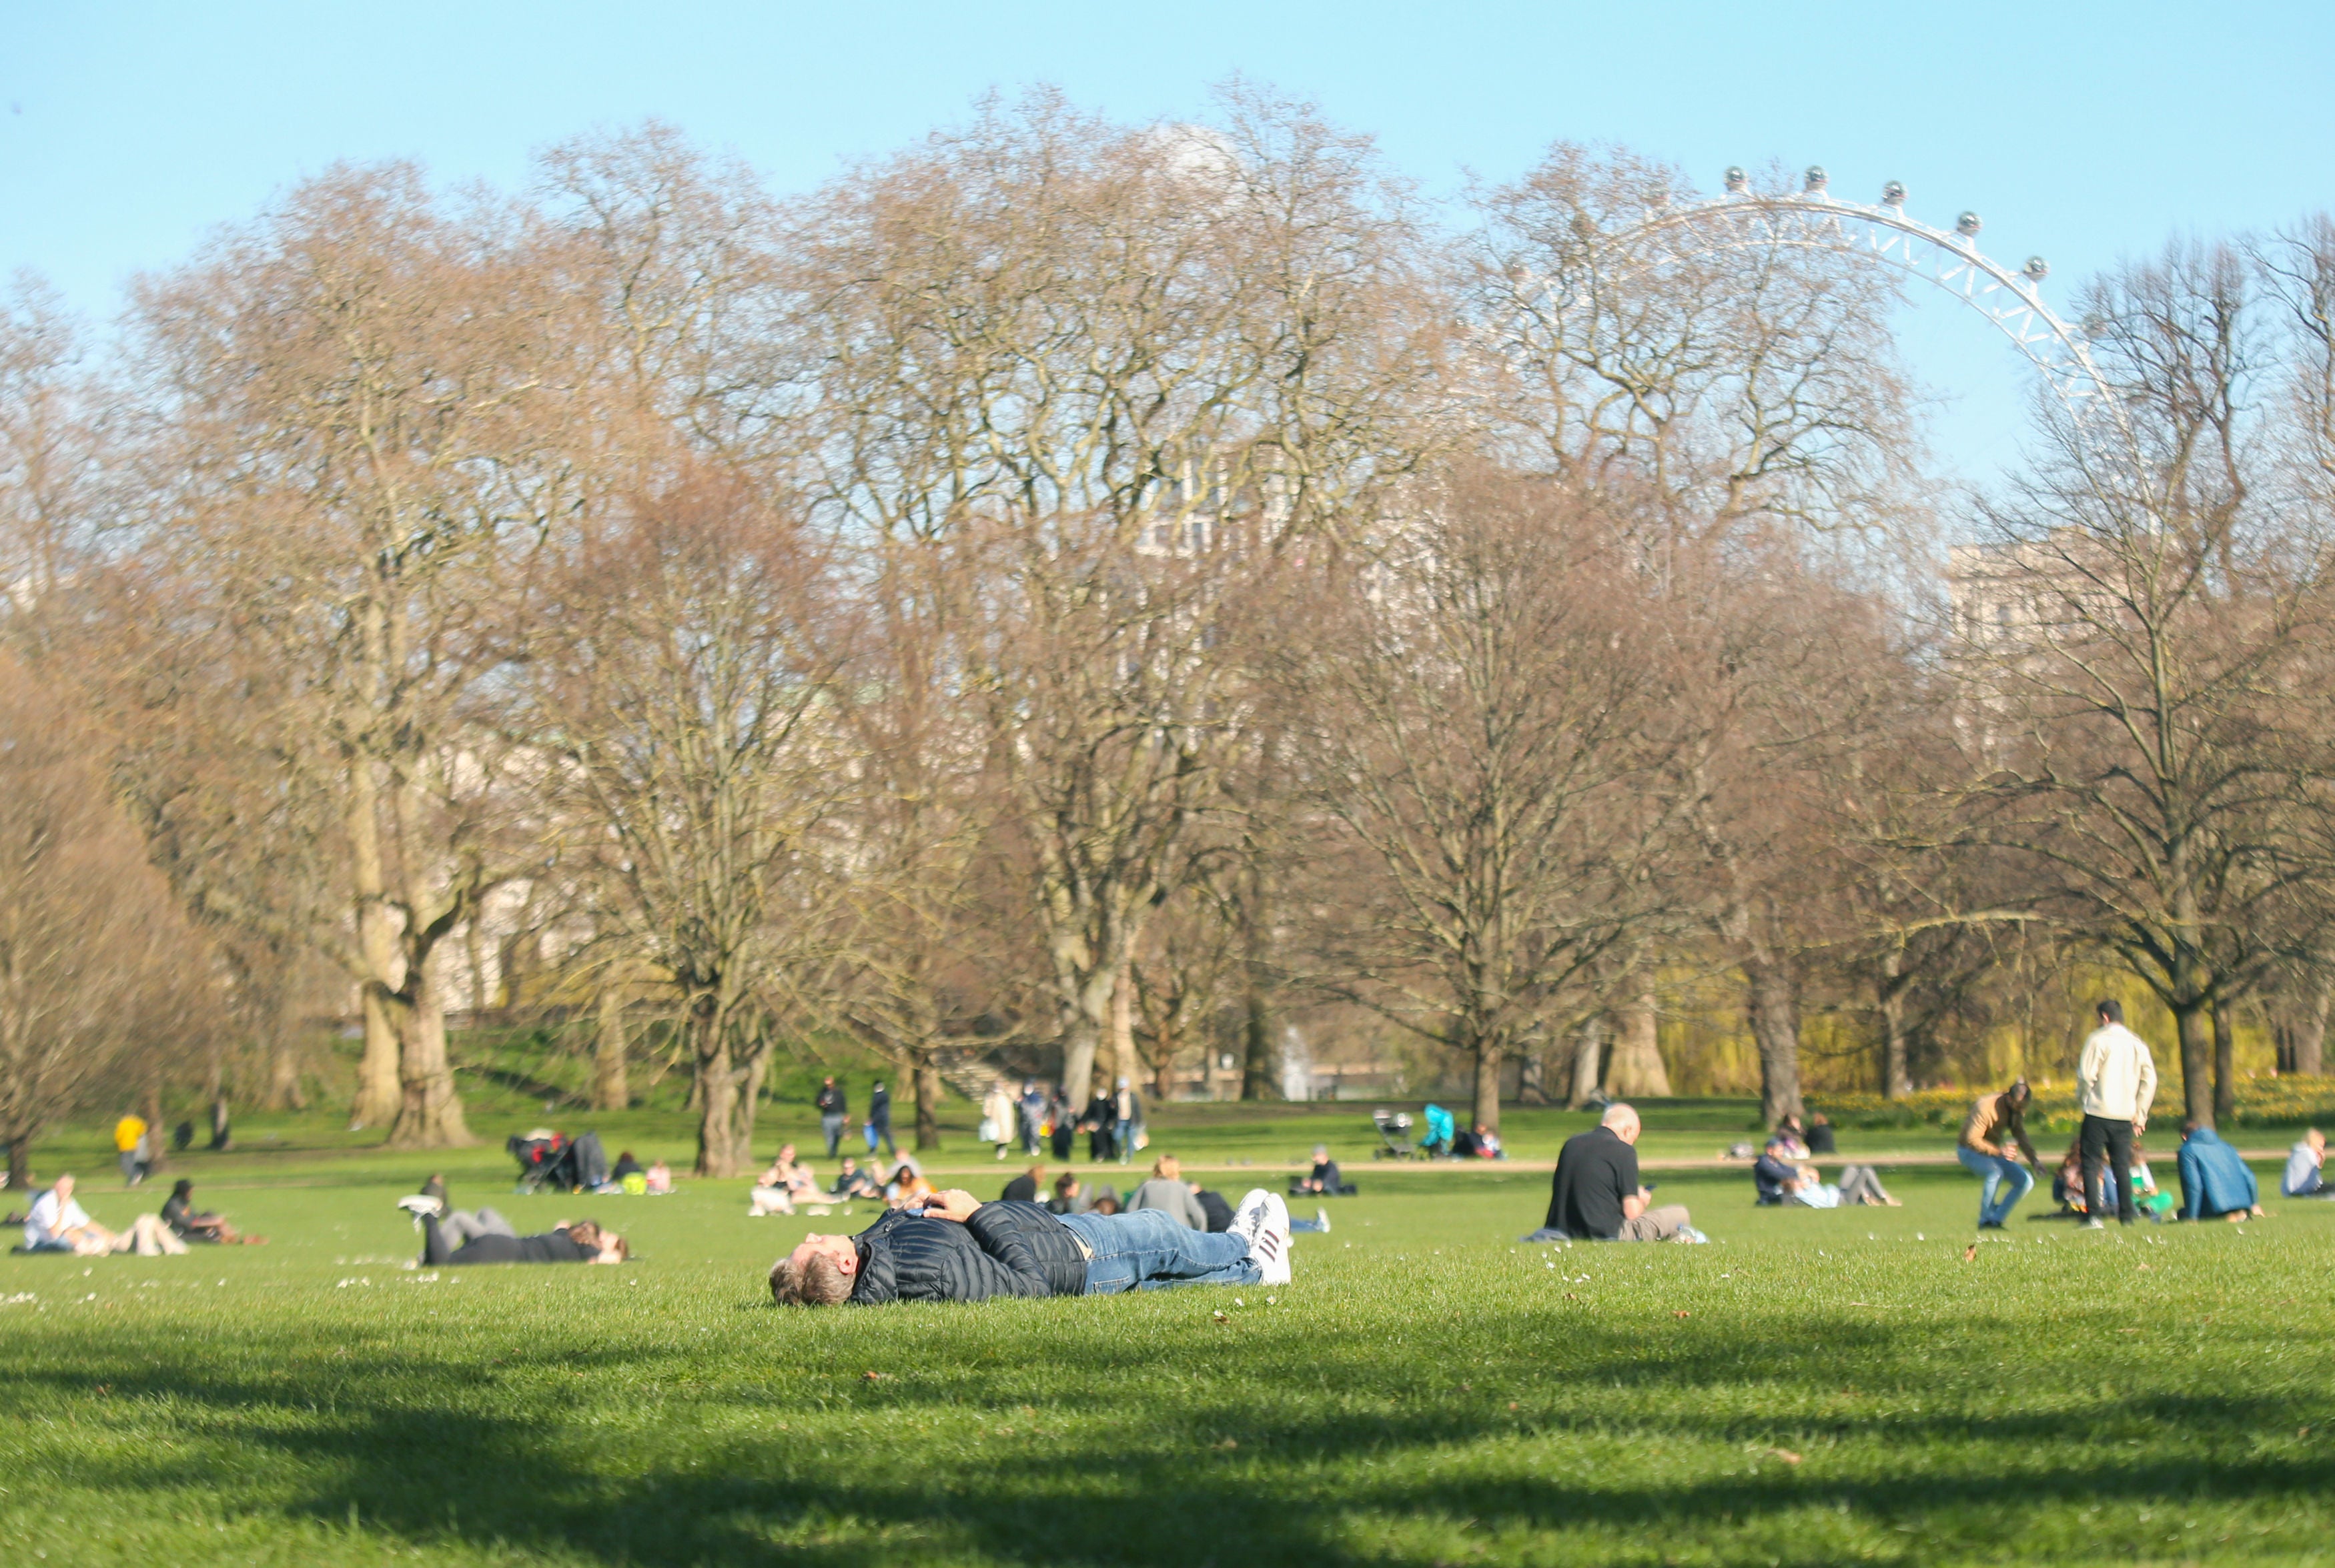 People in St James’ Park, central London, ahead of this week’s warm spell